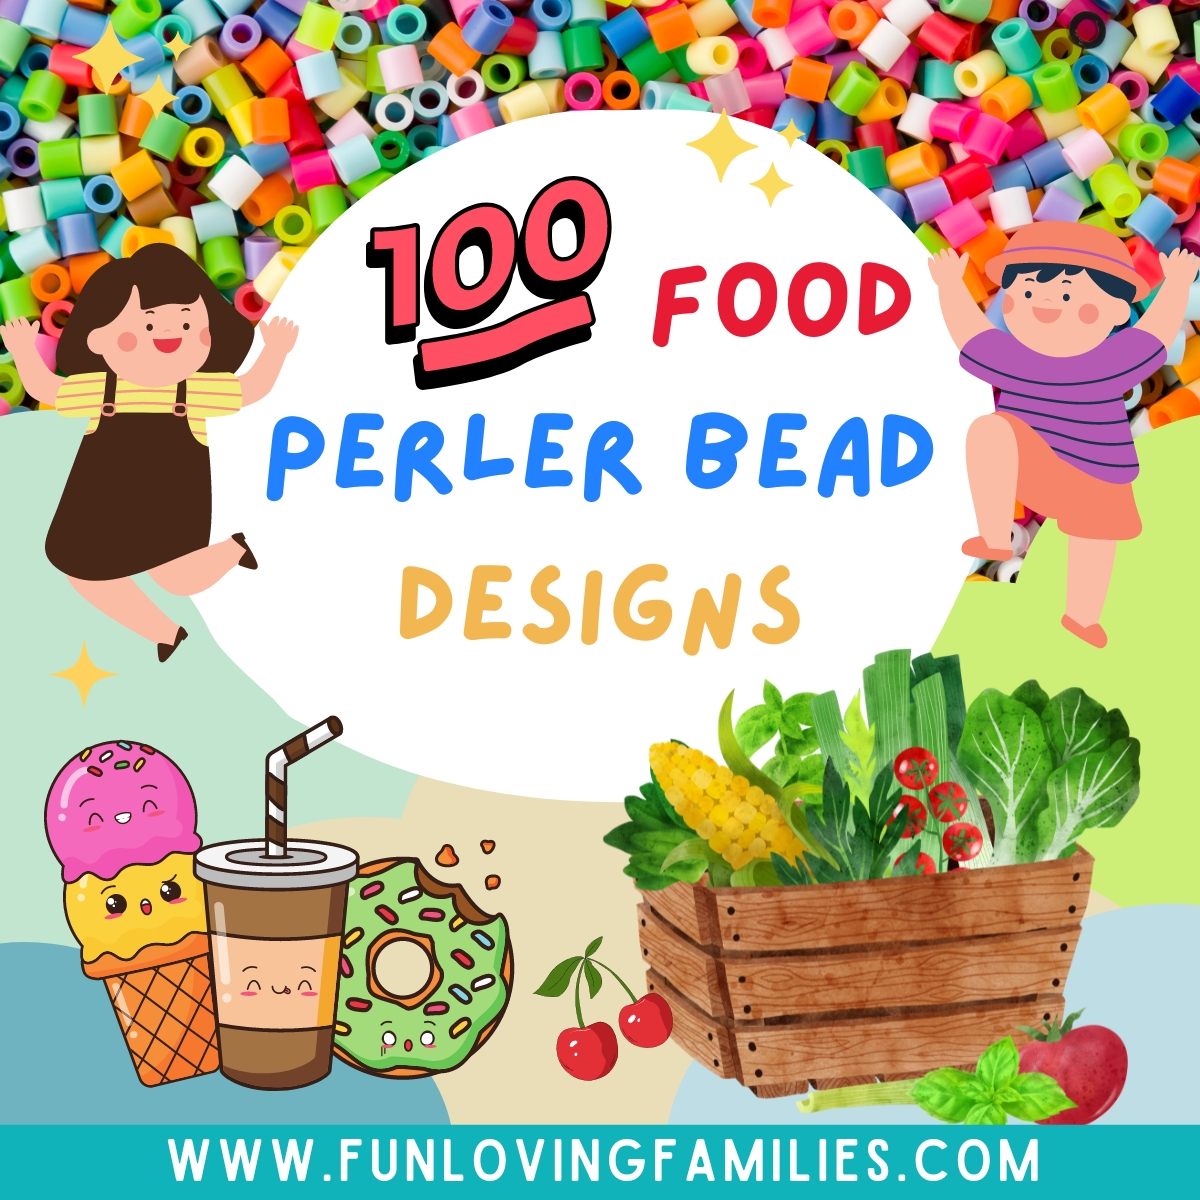 100 Food Perler Bead Patterns Designs And Ideas